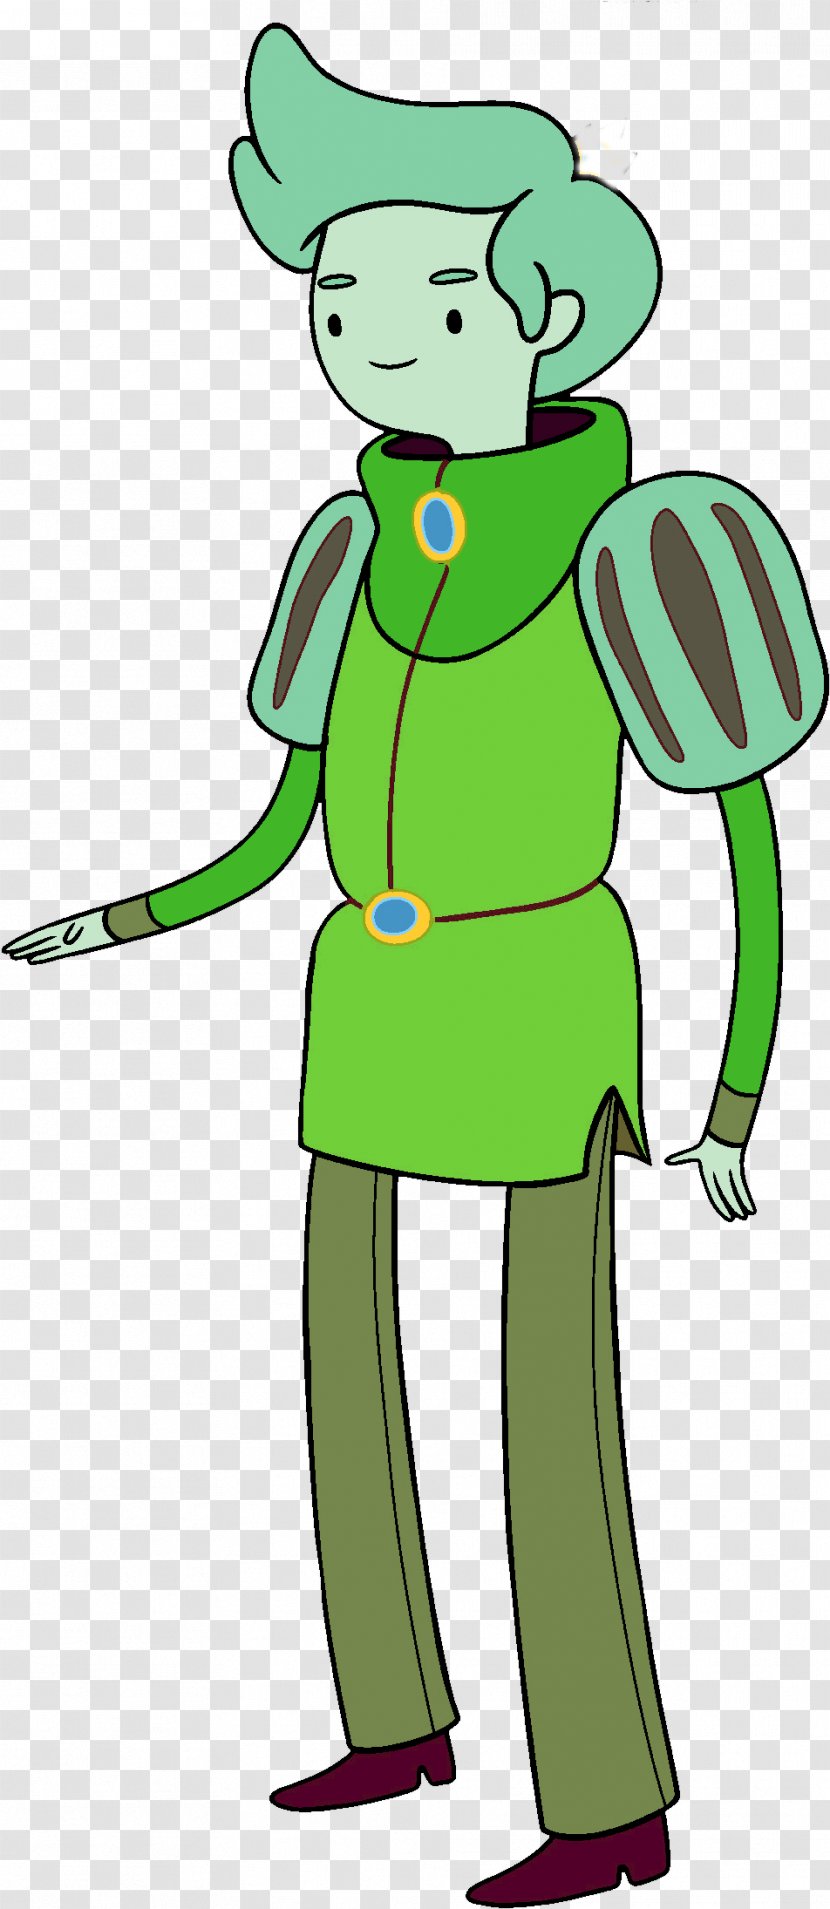 Princess Bubblegum Evil Guy Marceline The Vampire Queen Fionna And Cake Drawing - Tree - Adventure Time Transparent PNG